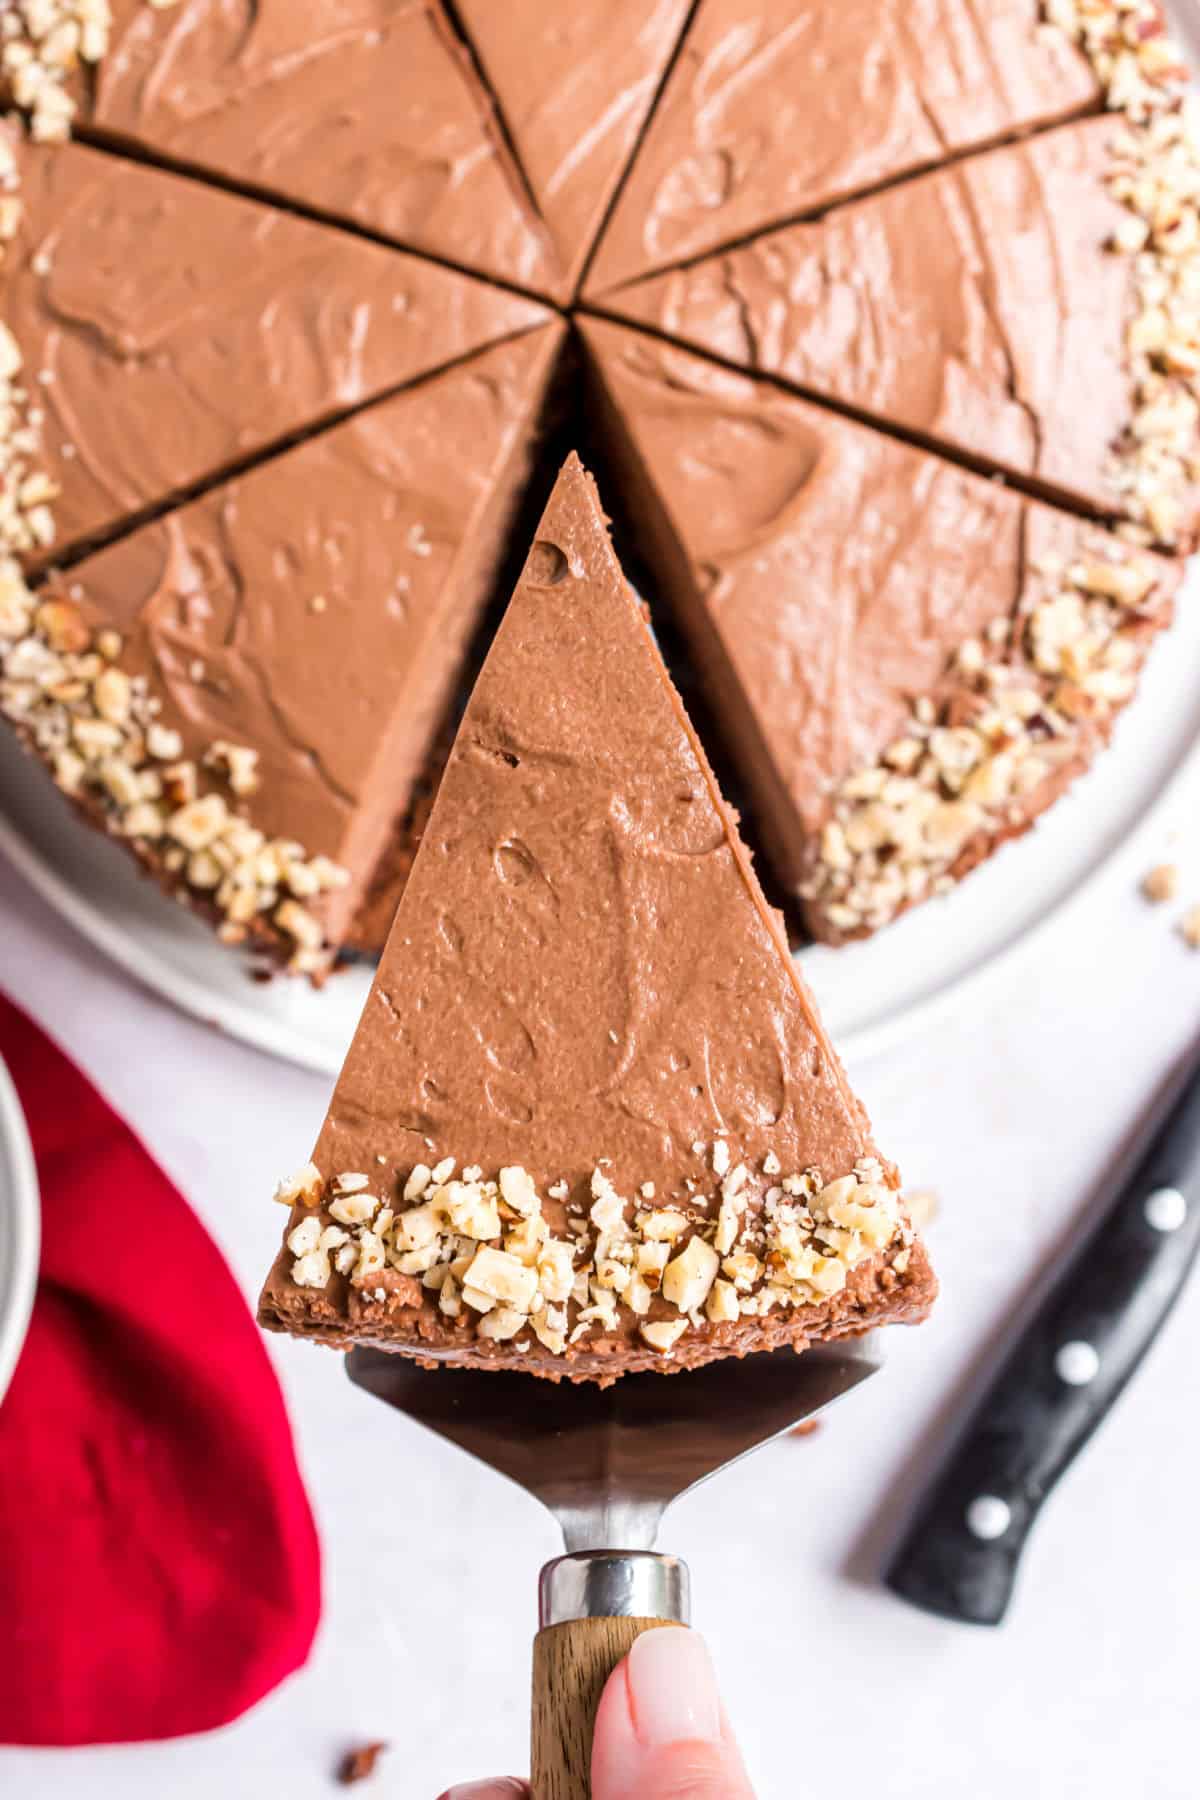 Hazelnut tarte cut into slices with one being removed on spatula.